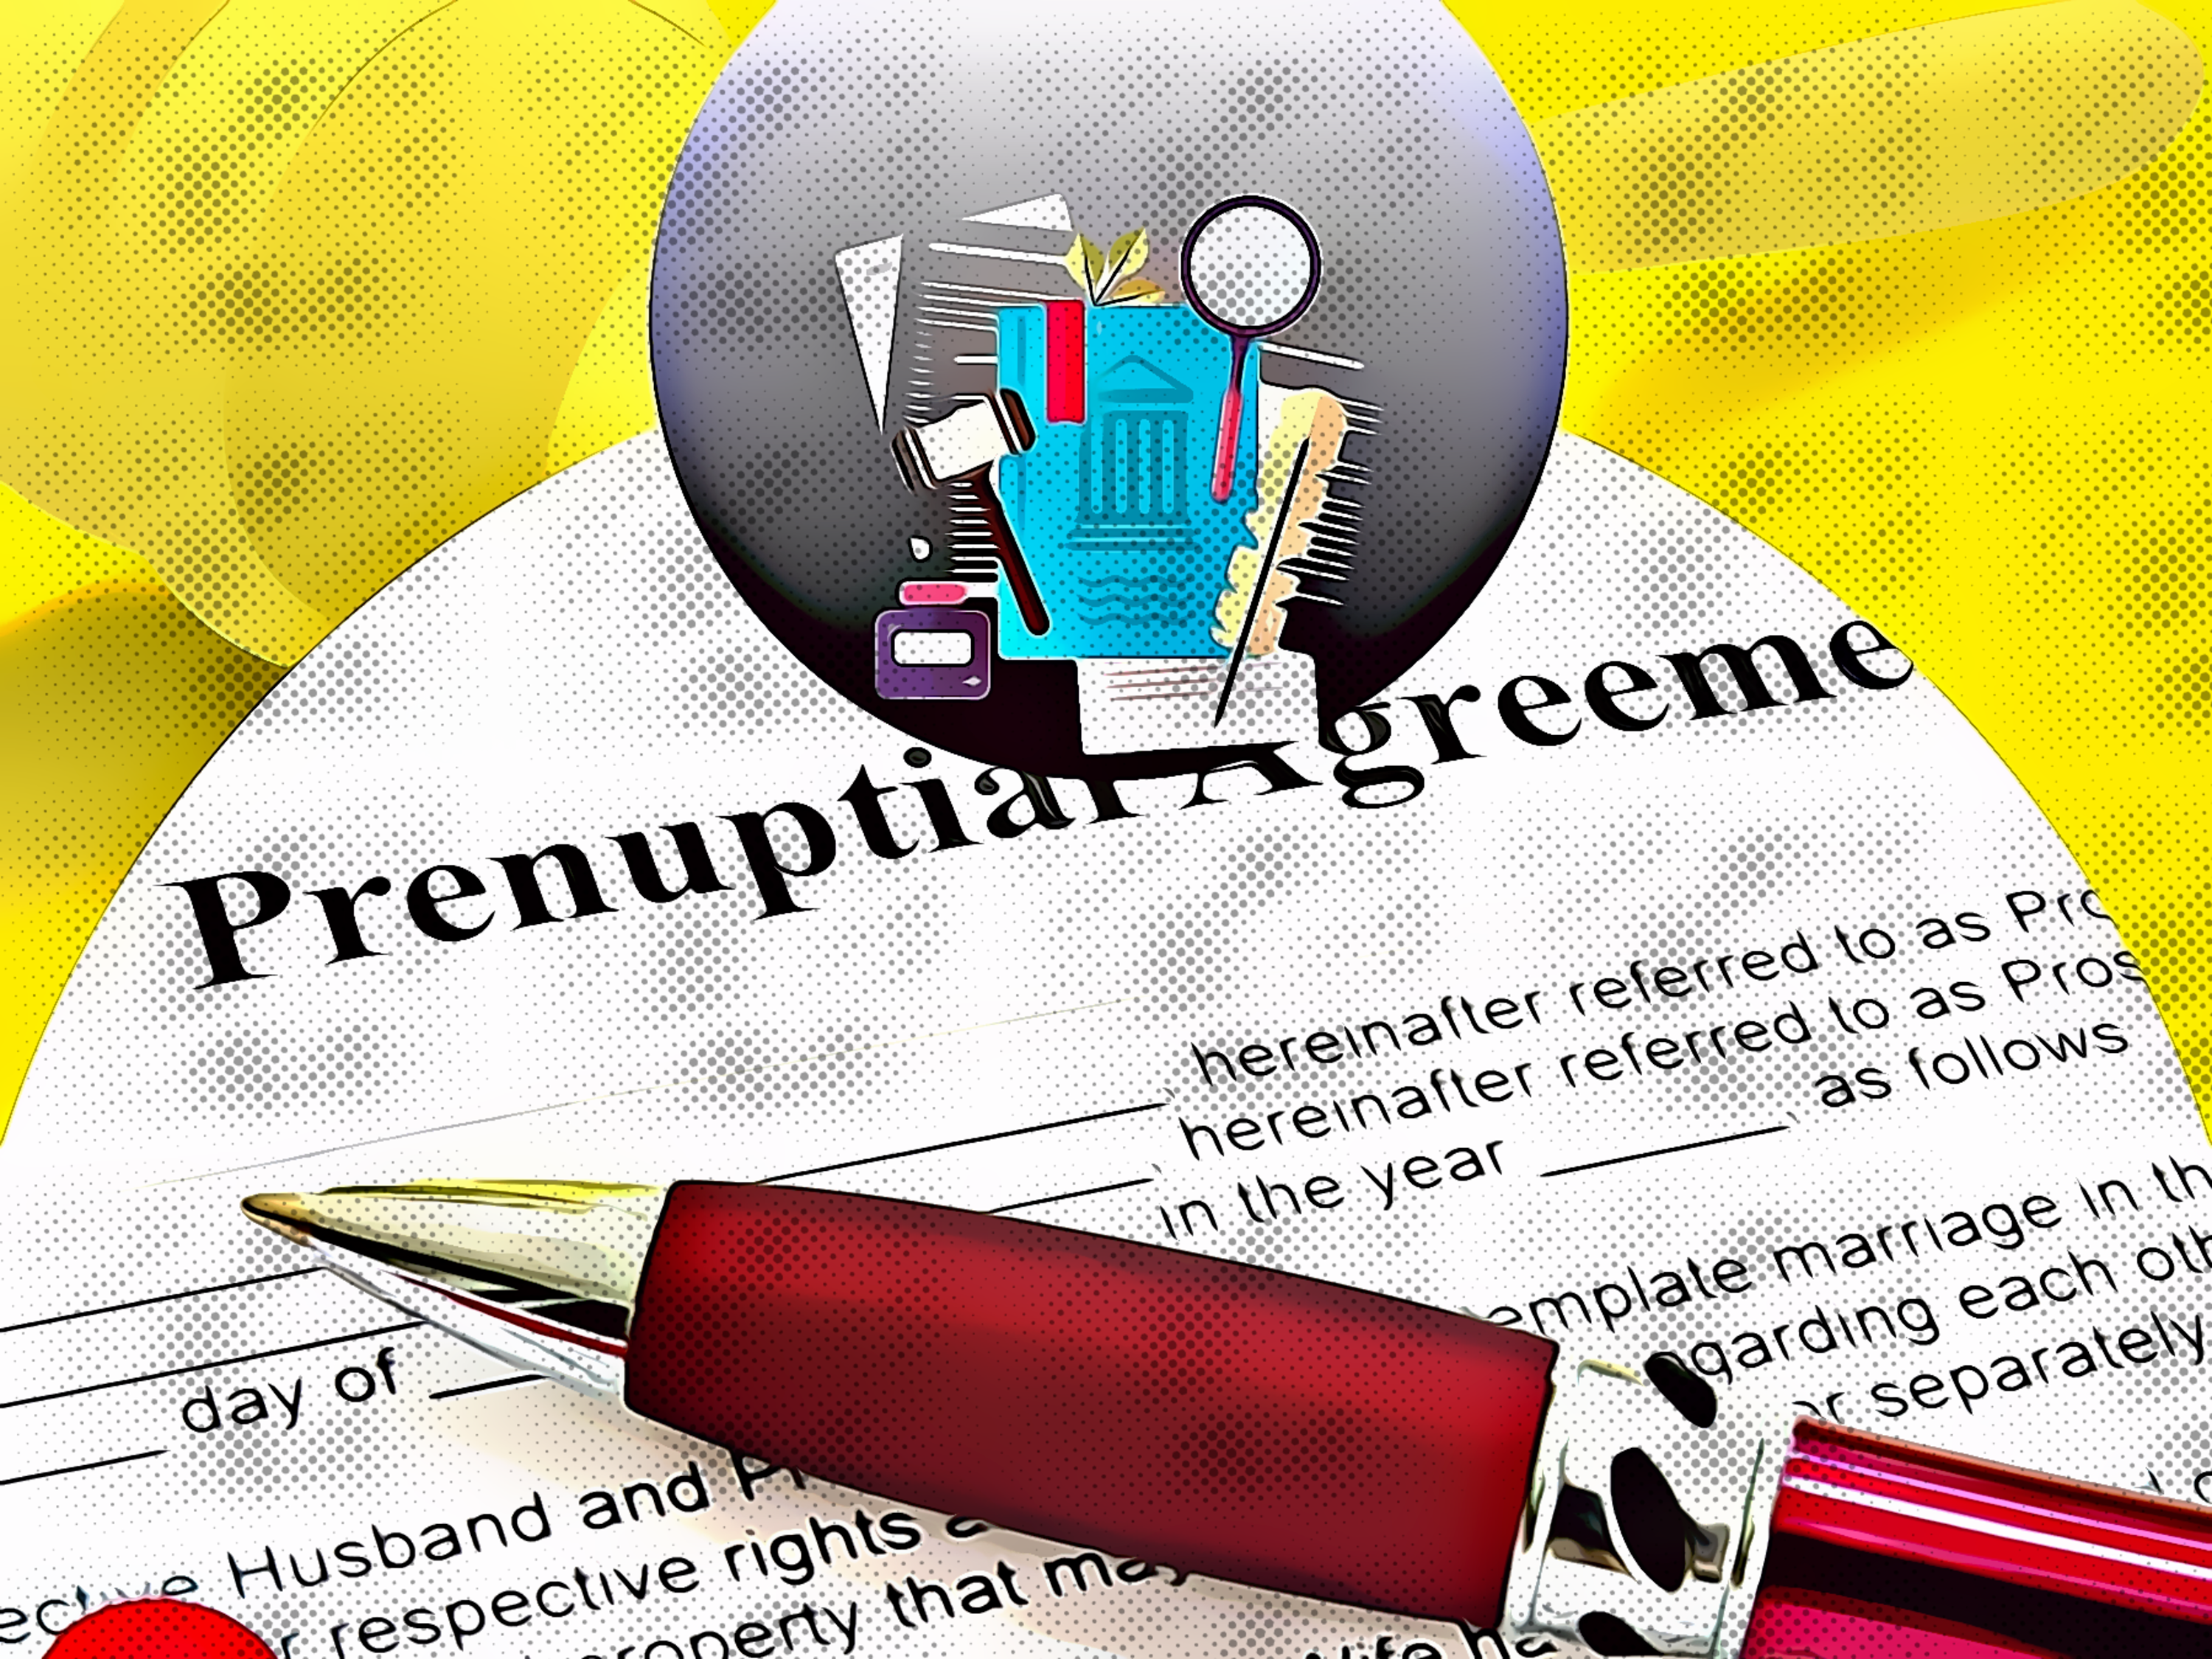 From the legal perspective on prenuptial agreement